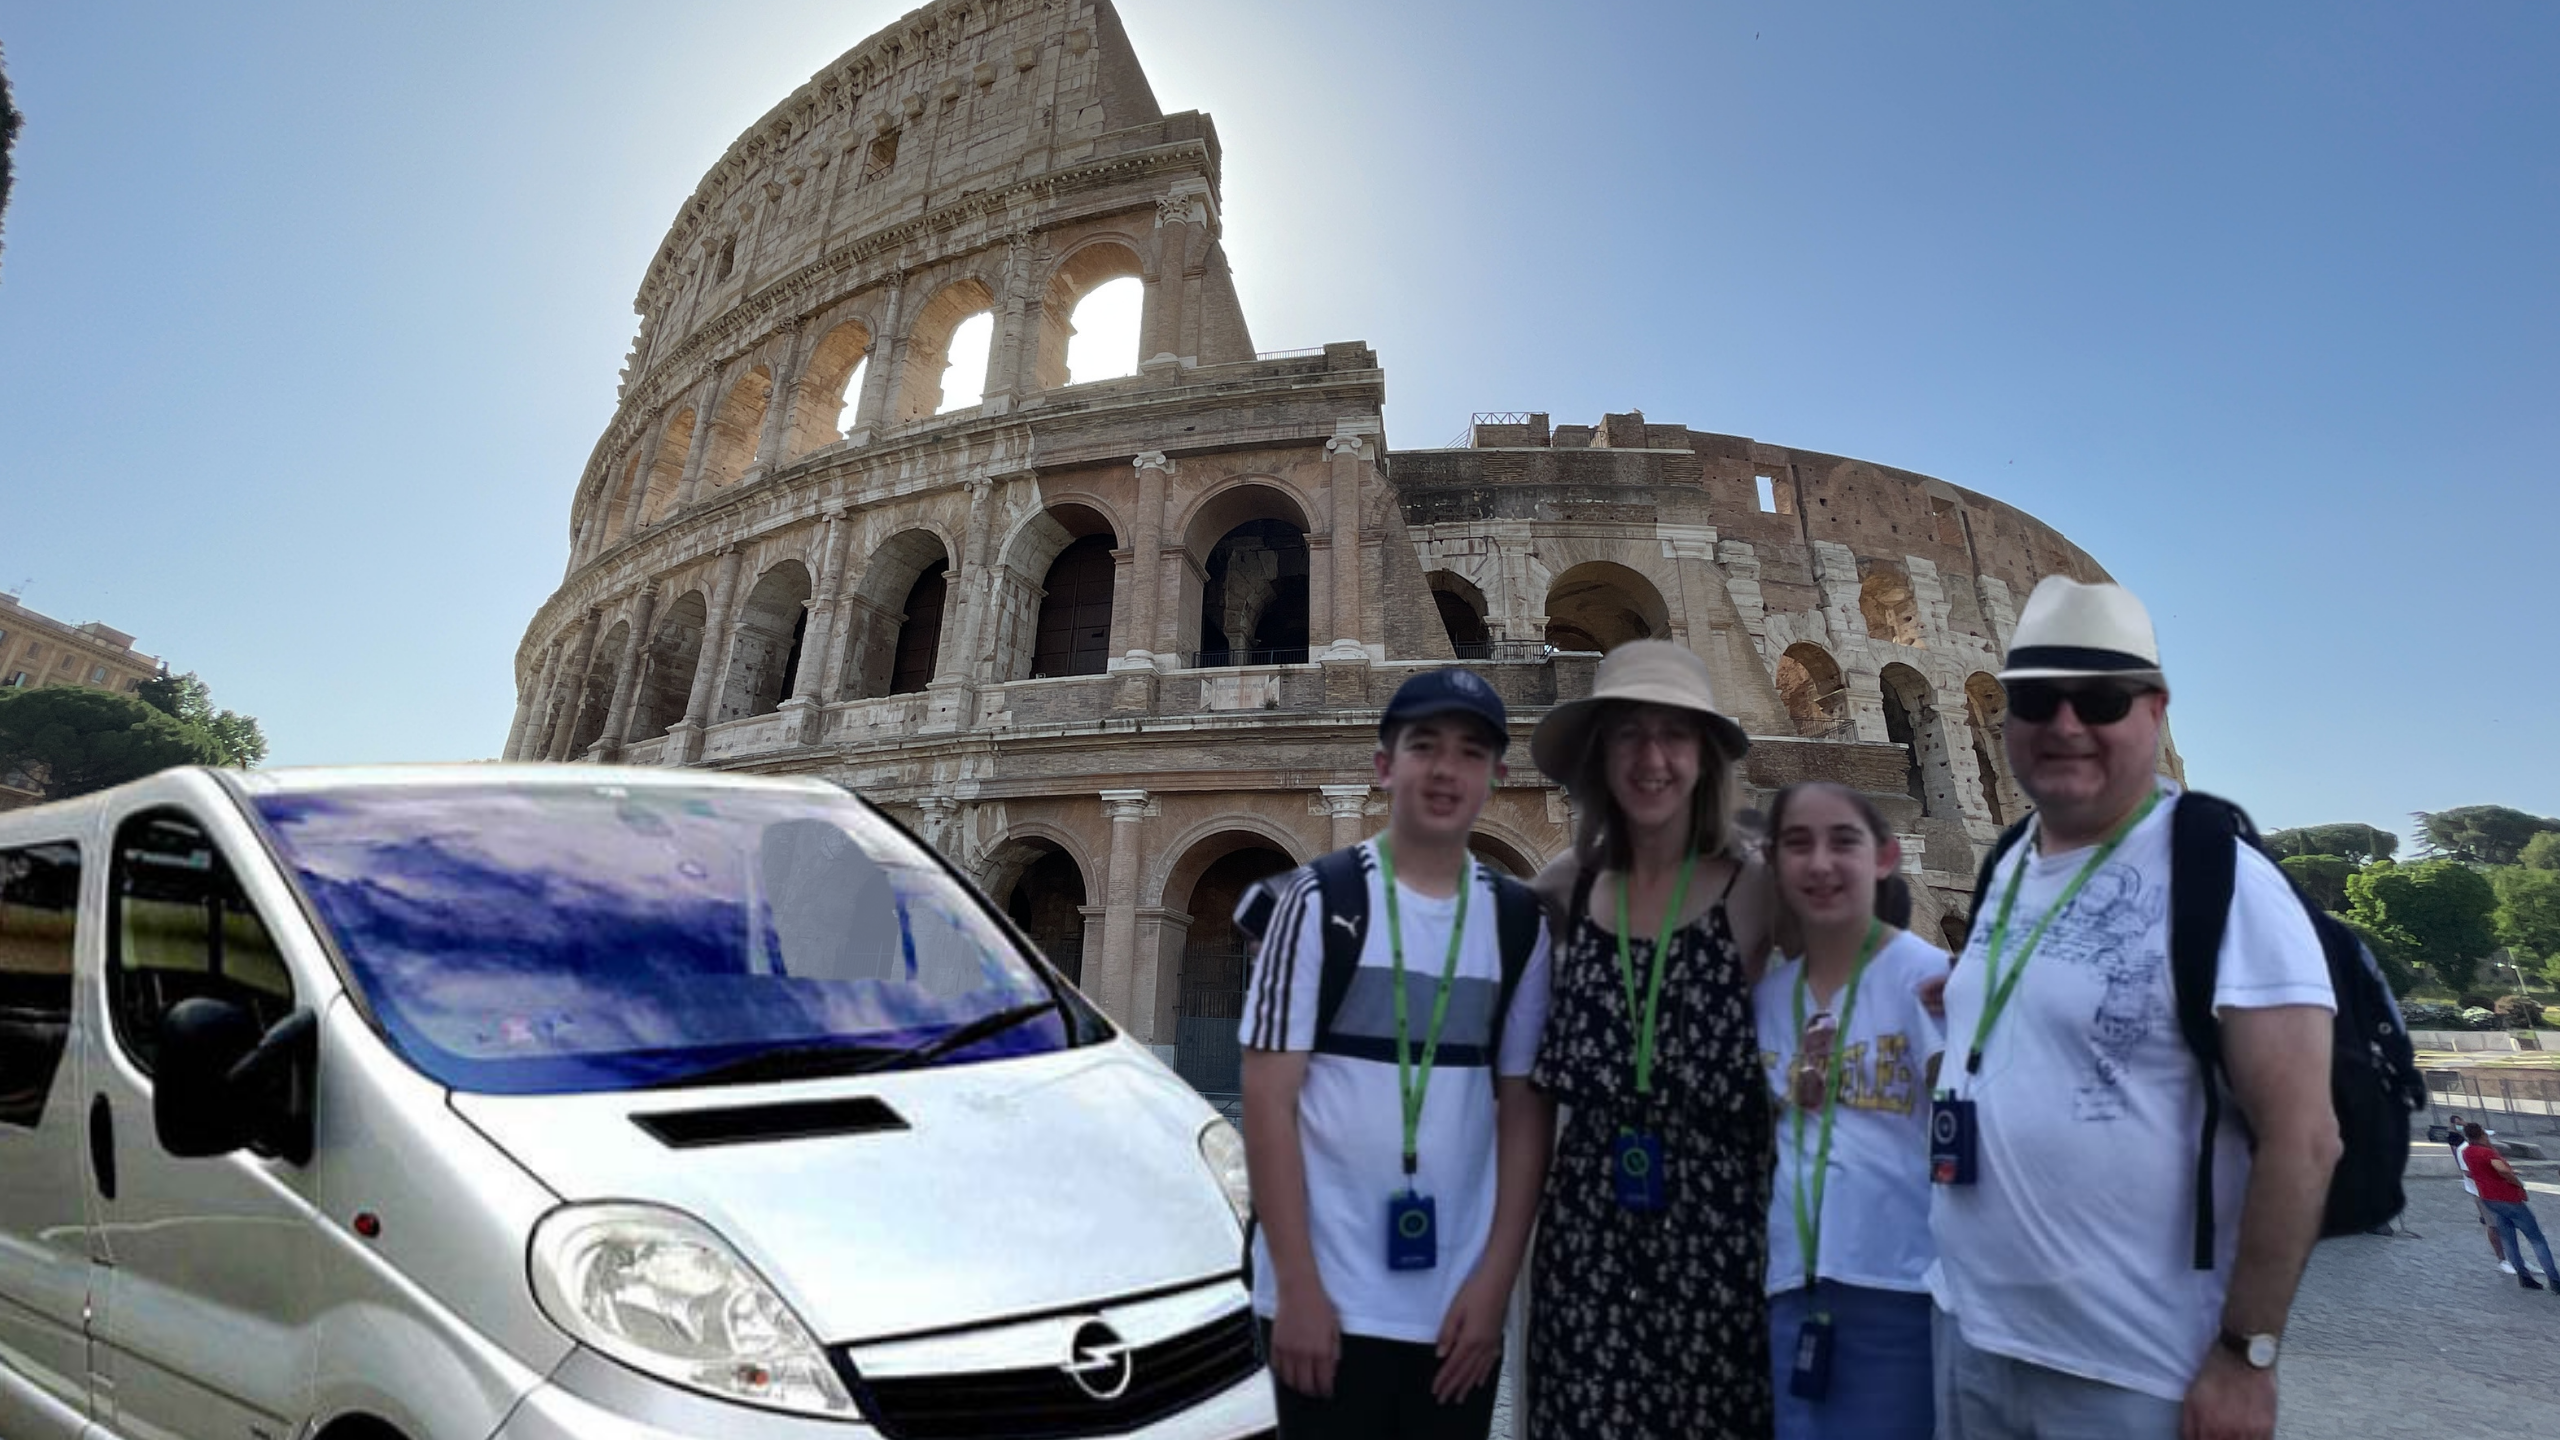 Family standing outside the Colosseum by a minivan